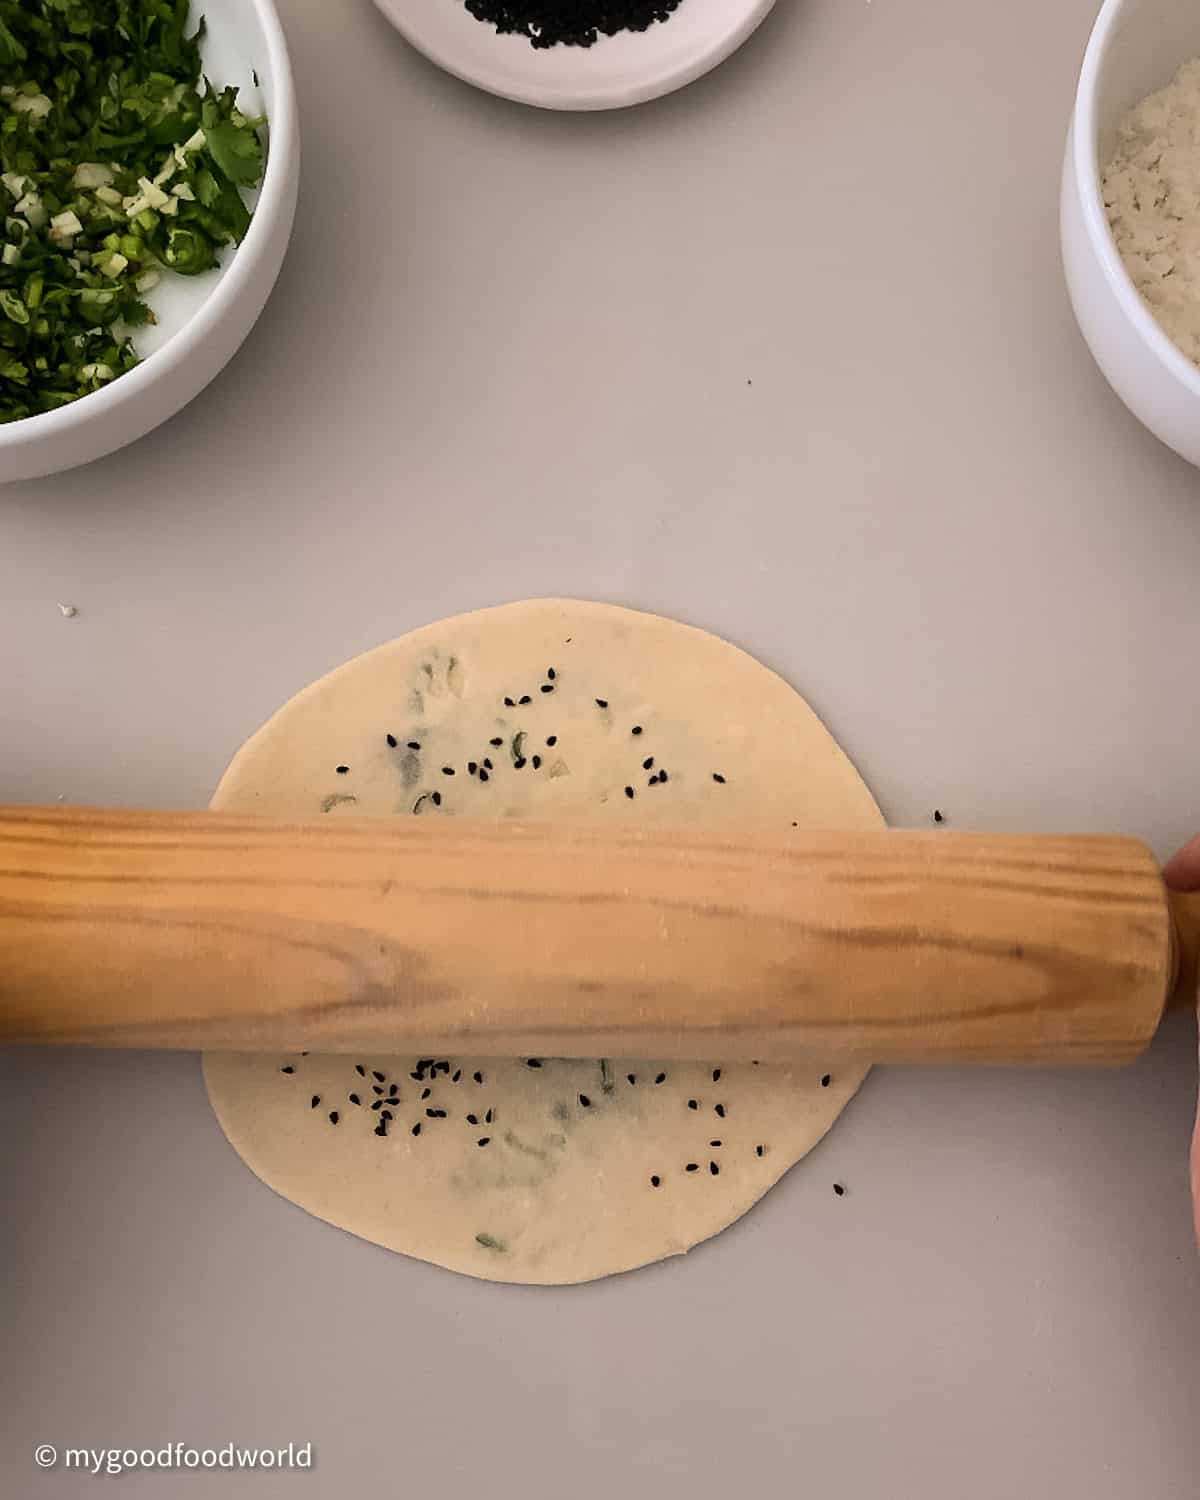 Nigella seeds that are sprinkled on a flatbread are being pressed down into the naan with a rolling pin.